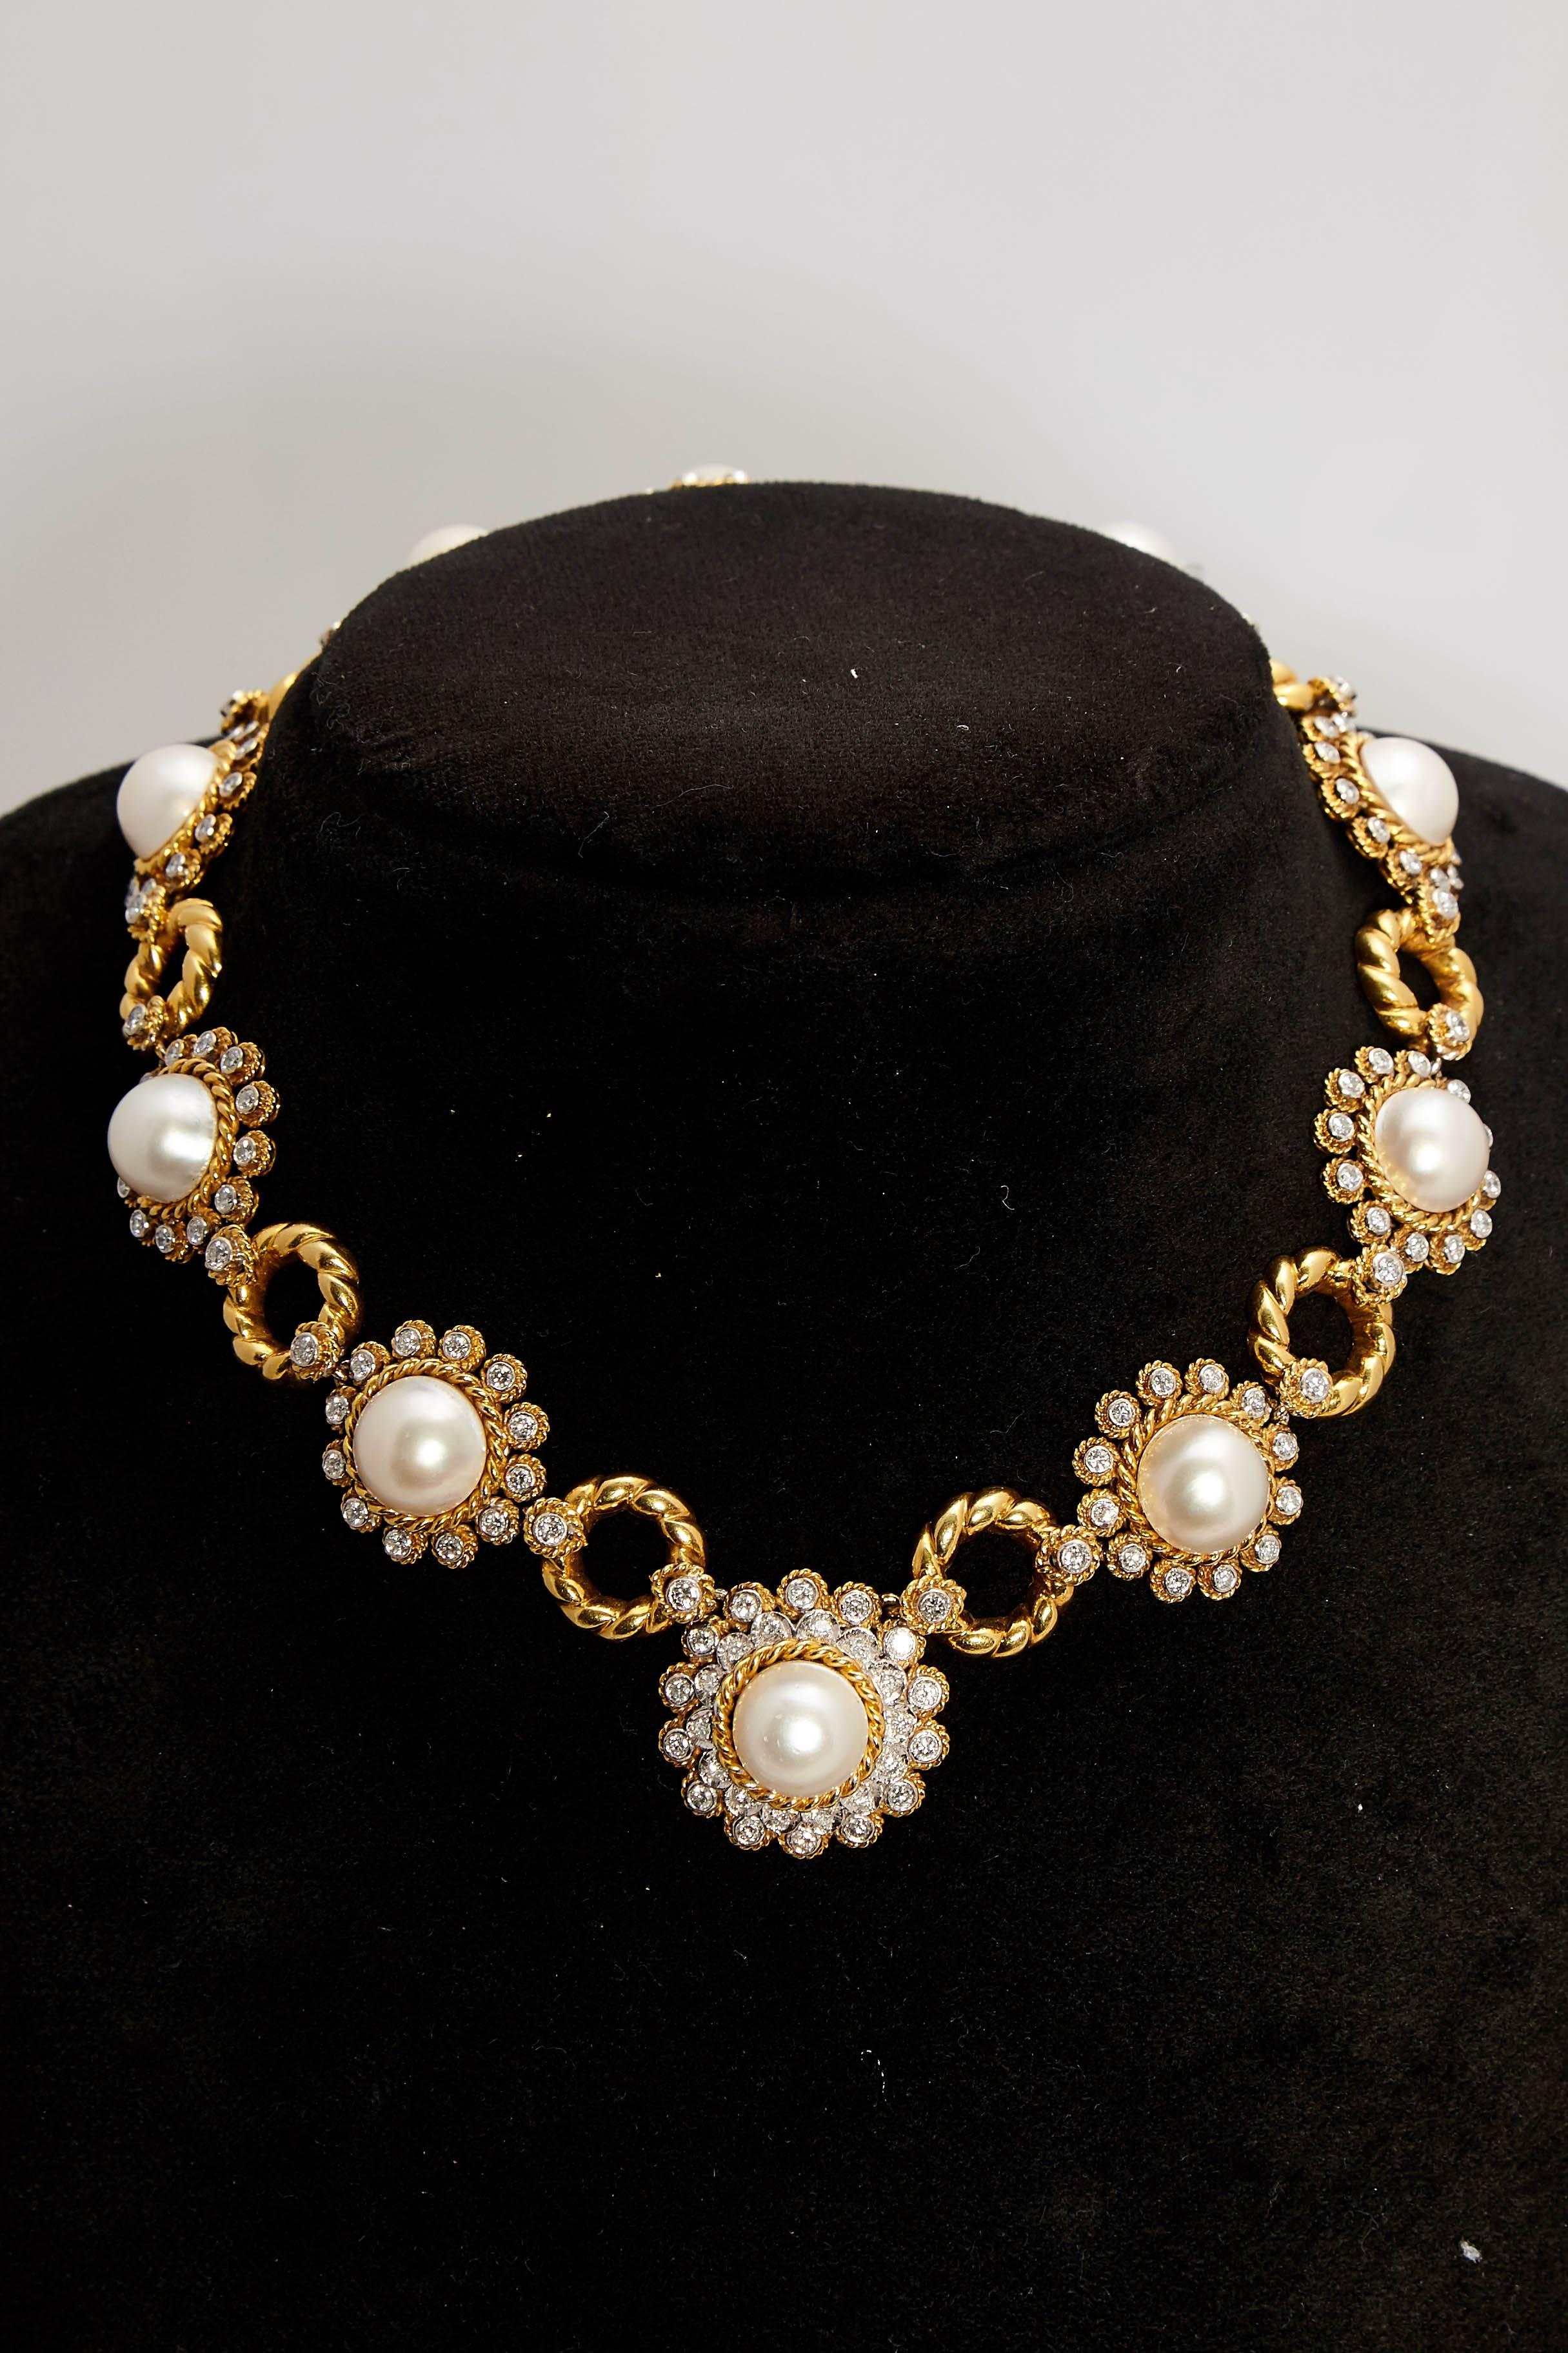 A demi parure of circular links, consisting of earclips and a necklace in yellow gold with diamonds (13 cts) and mabé pearls. Made in Italy, circa 1970.